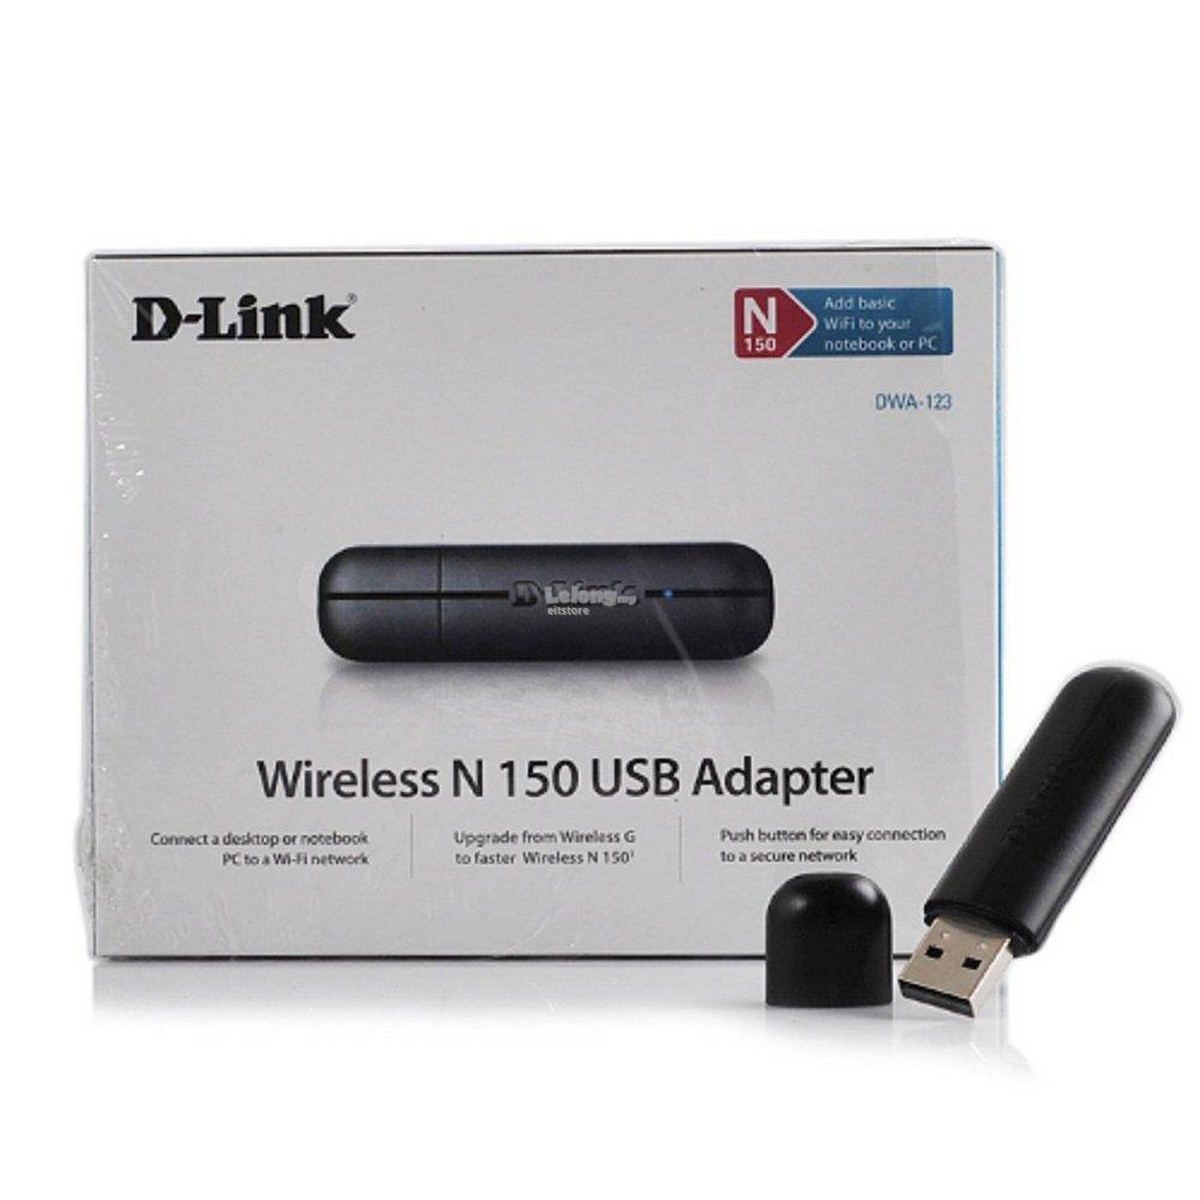 D-Link Wi-Fi USB Adapter Installation Guide